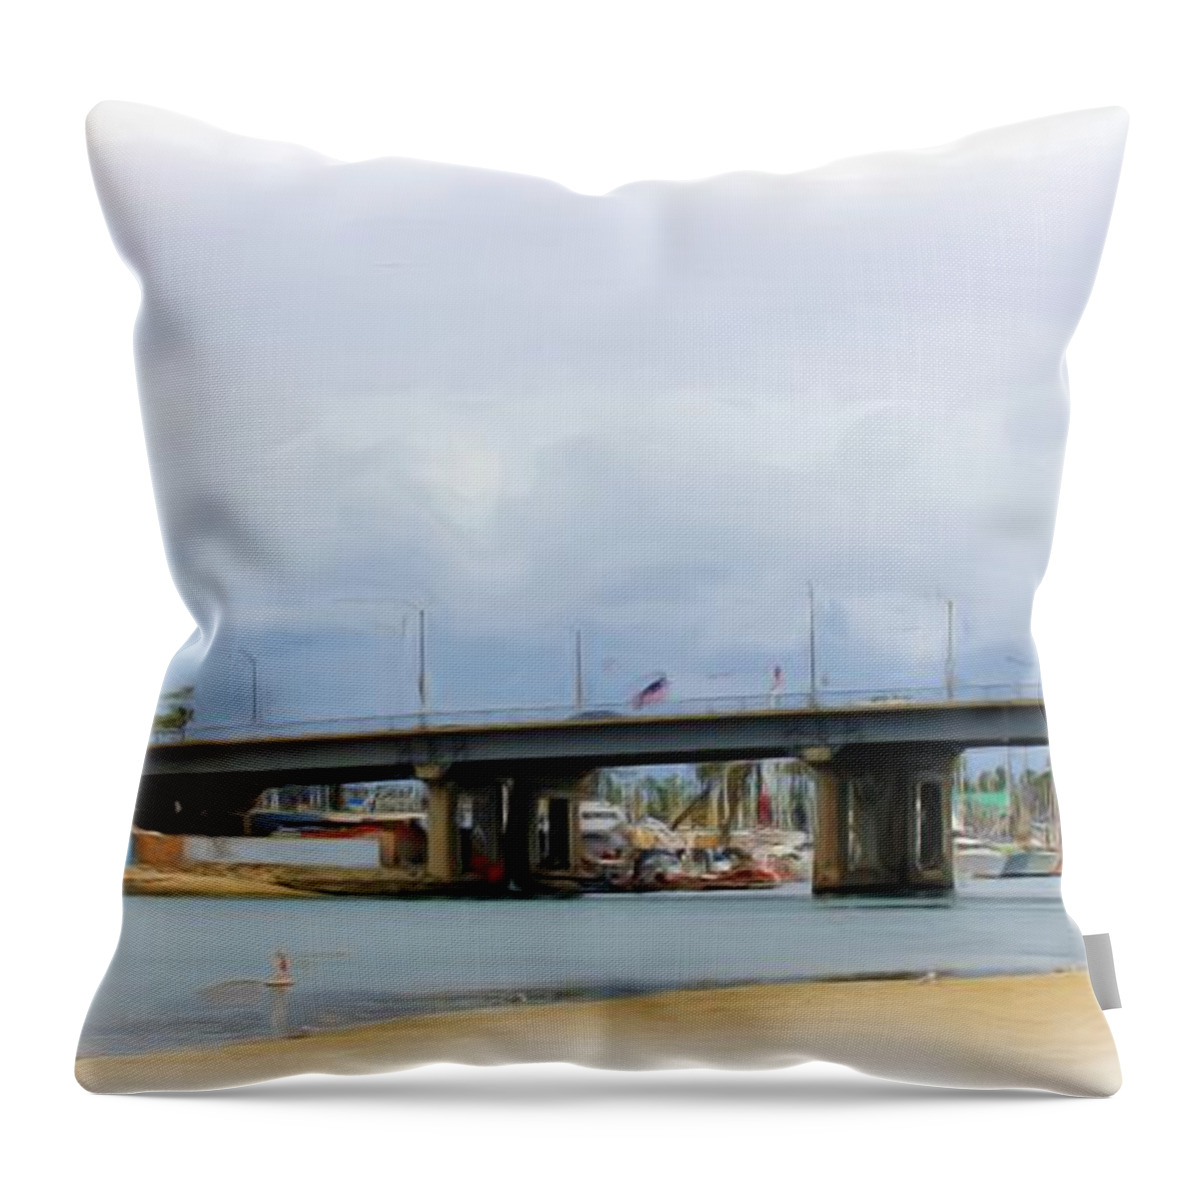  Throw Pillow featuring the photograph Mothers Beach by Heidi Smith